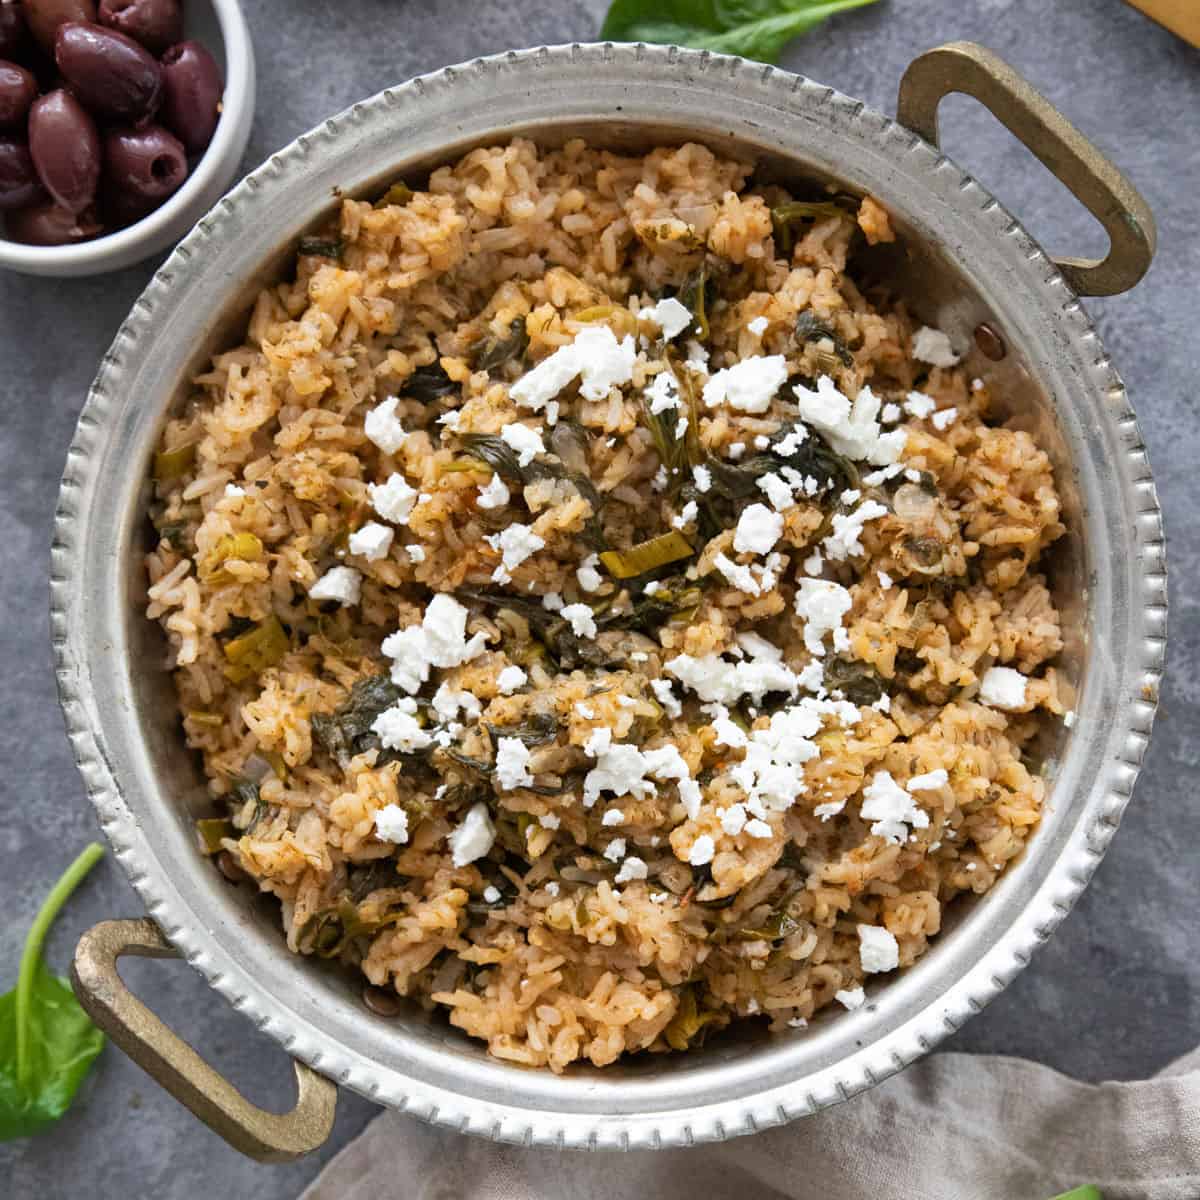 Spanakorizo is a classic Greek spinach rice that's easy and comforting. You only need a few ingredients to make this delicious vegetarian recipe.
